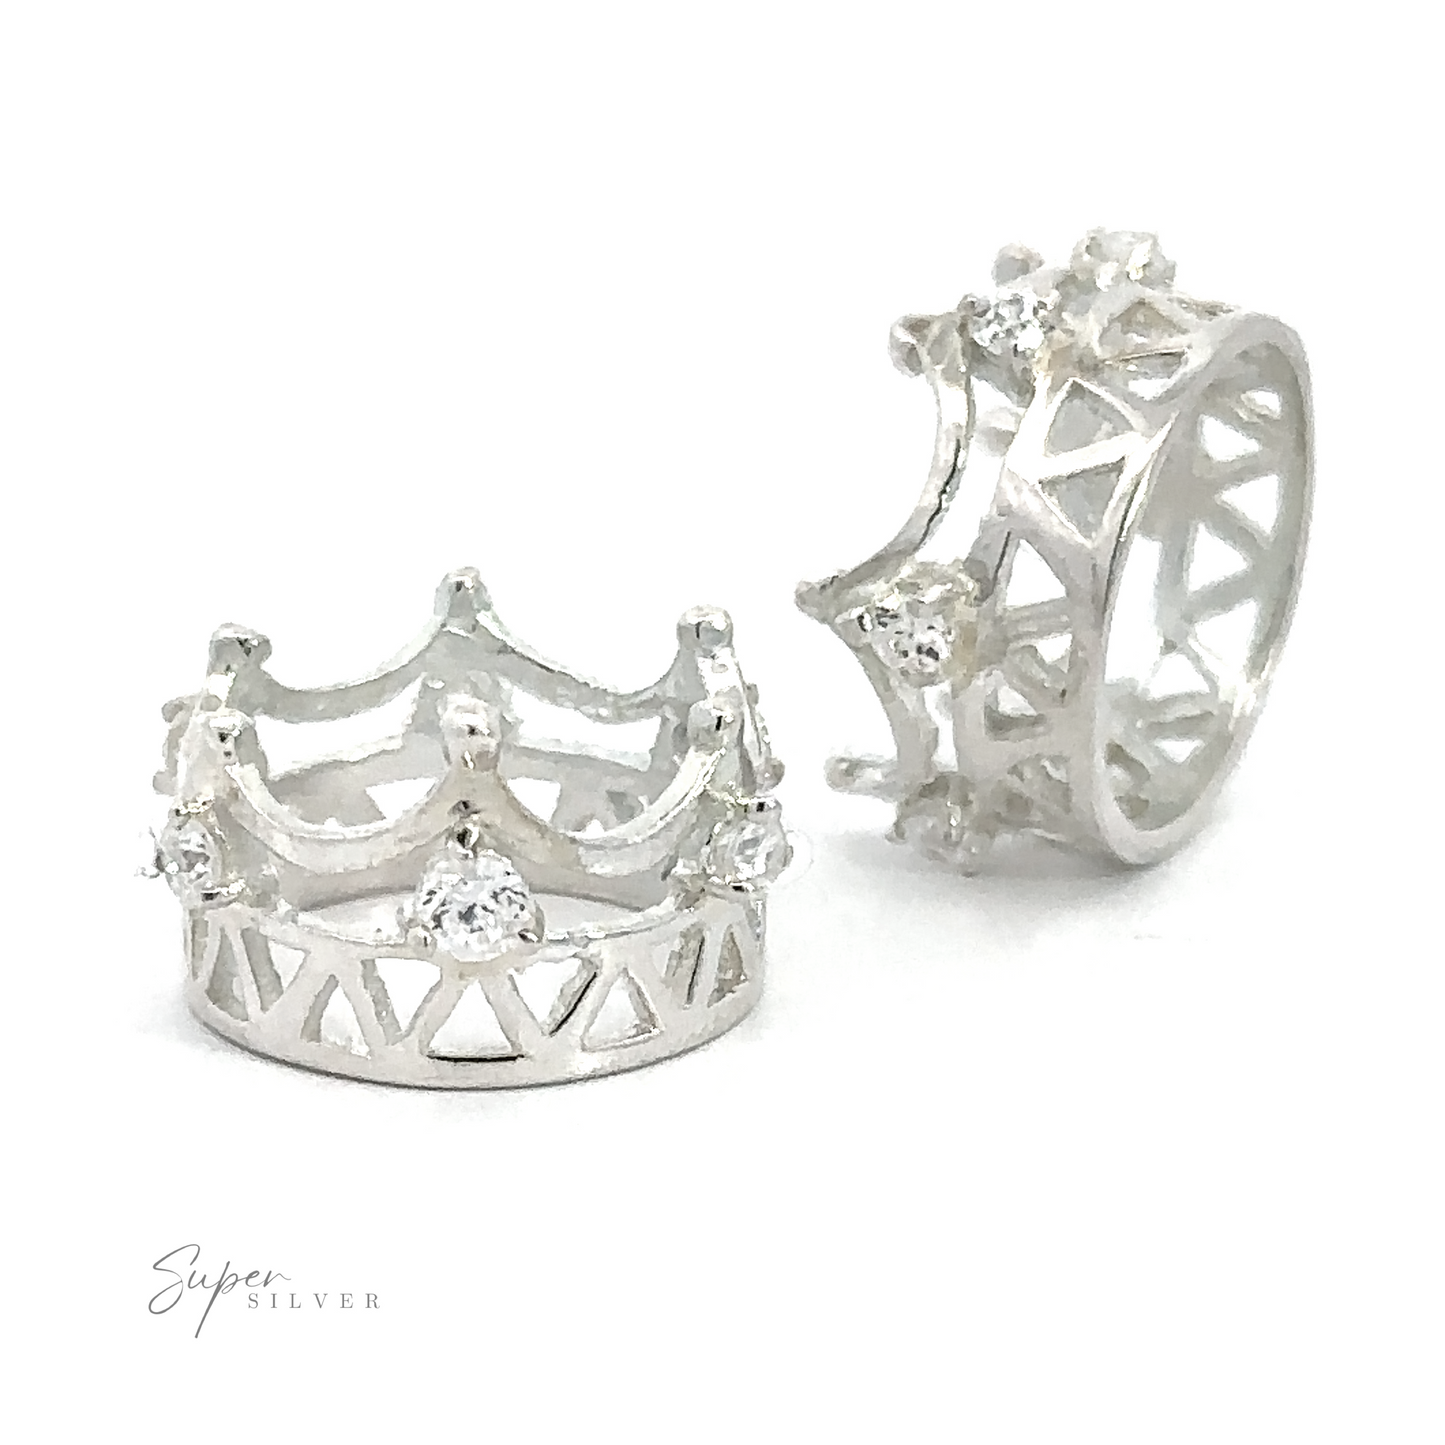 
                  
                    Two sterling silver crown-shaped rings with intricate designs and small cubic zirconia gemstones are displayed. The Cubic Zirconia Crown Pendant features openwork patterns and decorative elements. A small "Super Silver" logo is visible in the corner.
                  
                